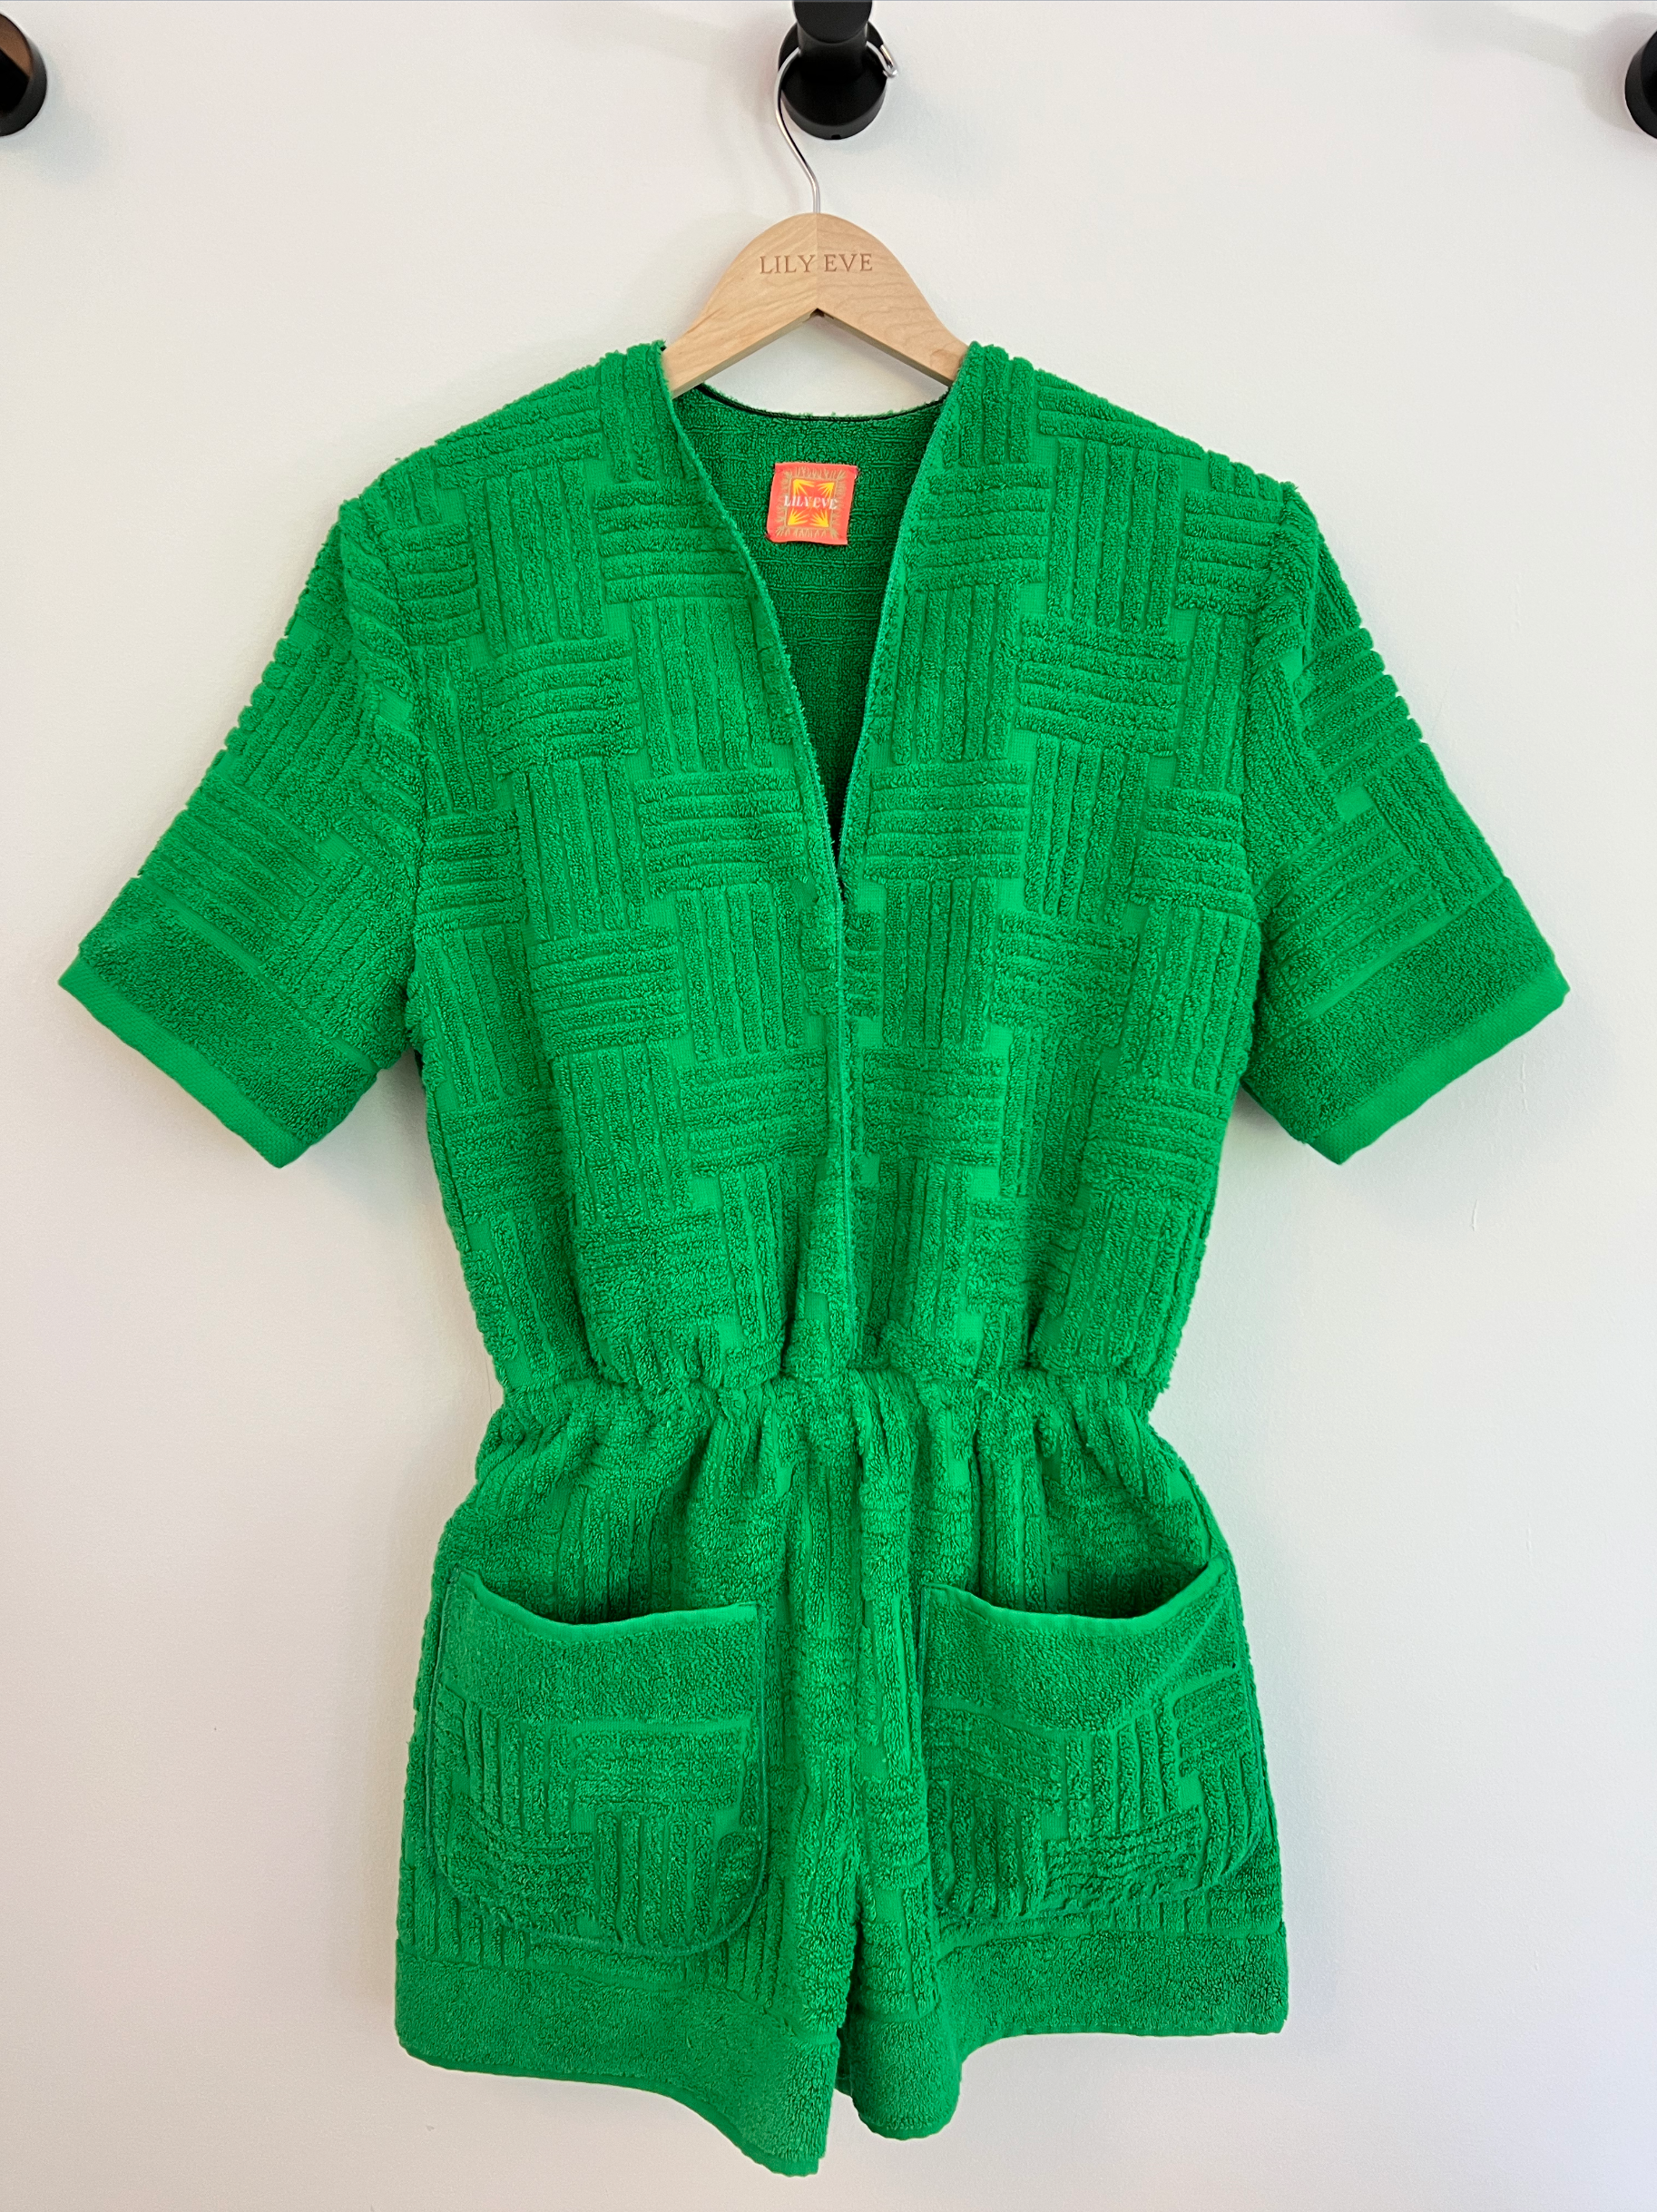 The Lime Jumpsuit